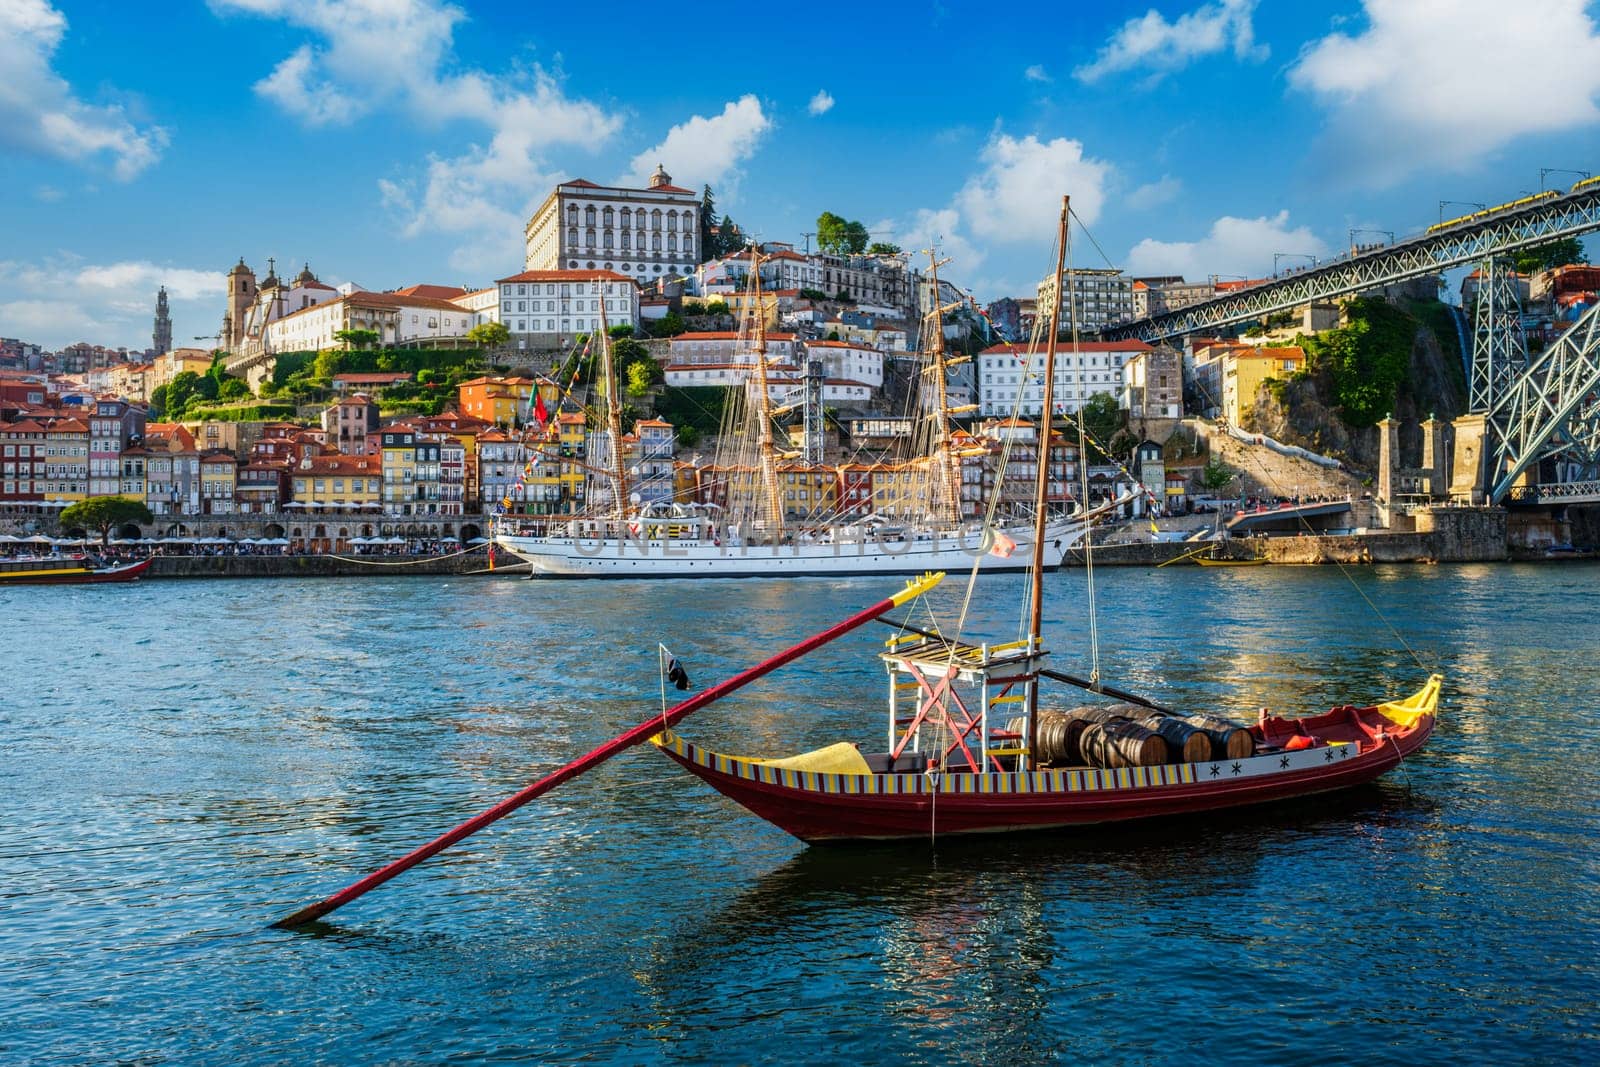 View of Porto city and Douro river with traditional boats with port wine barrels and sailing ship from famous tourist viewpoint Marginal de Gaia riverfront. Porto, Vila Nova de Gaia, Portugal